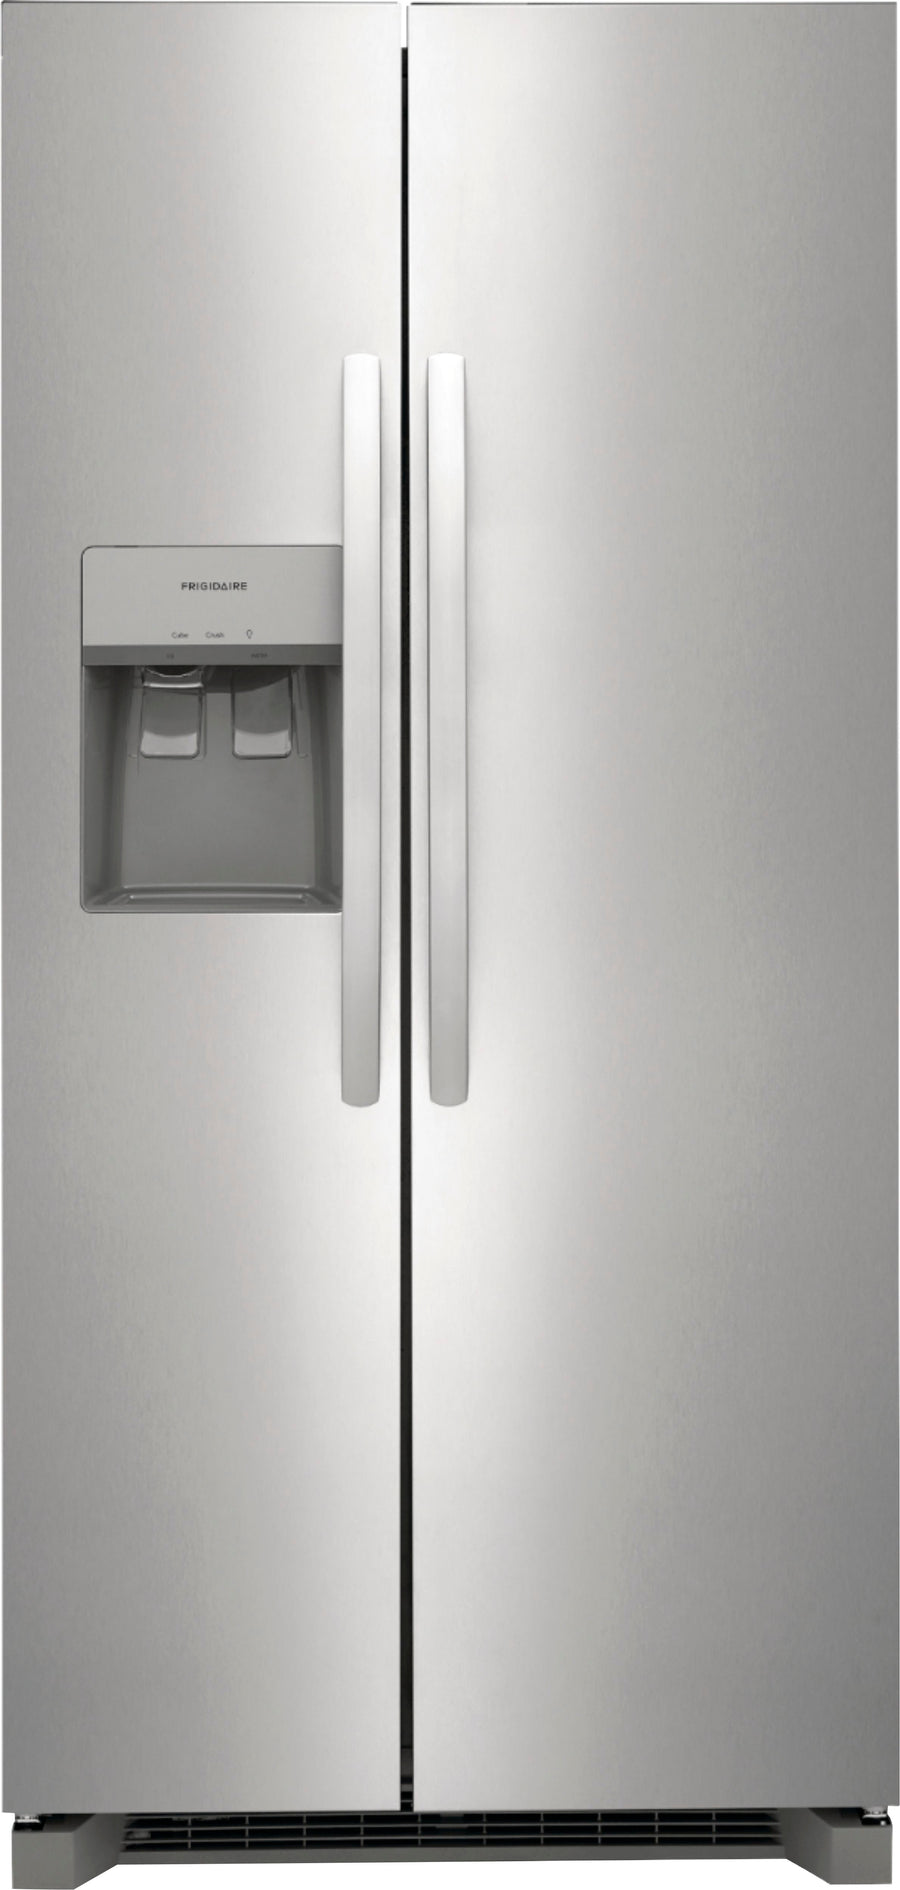 Frigidaire - 22.3 Cu. Ft. Side-by-Side Refrigerator - Stainless steel_0